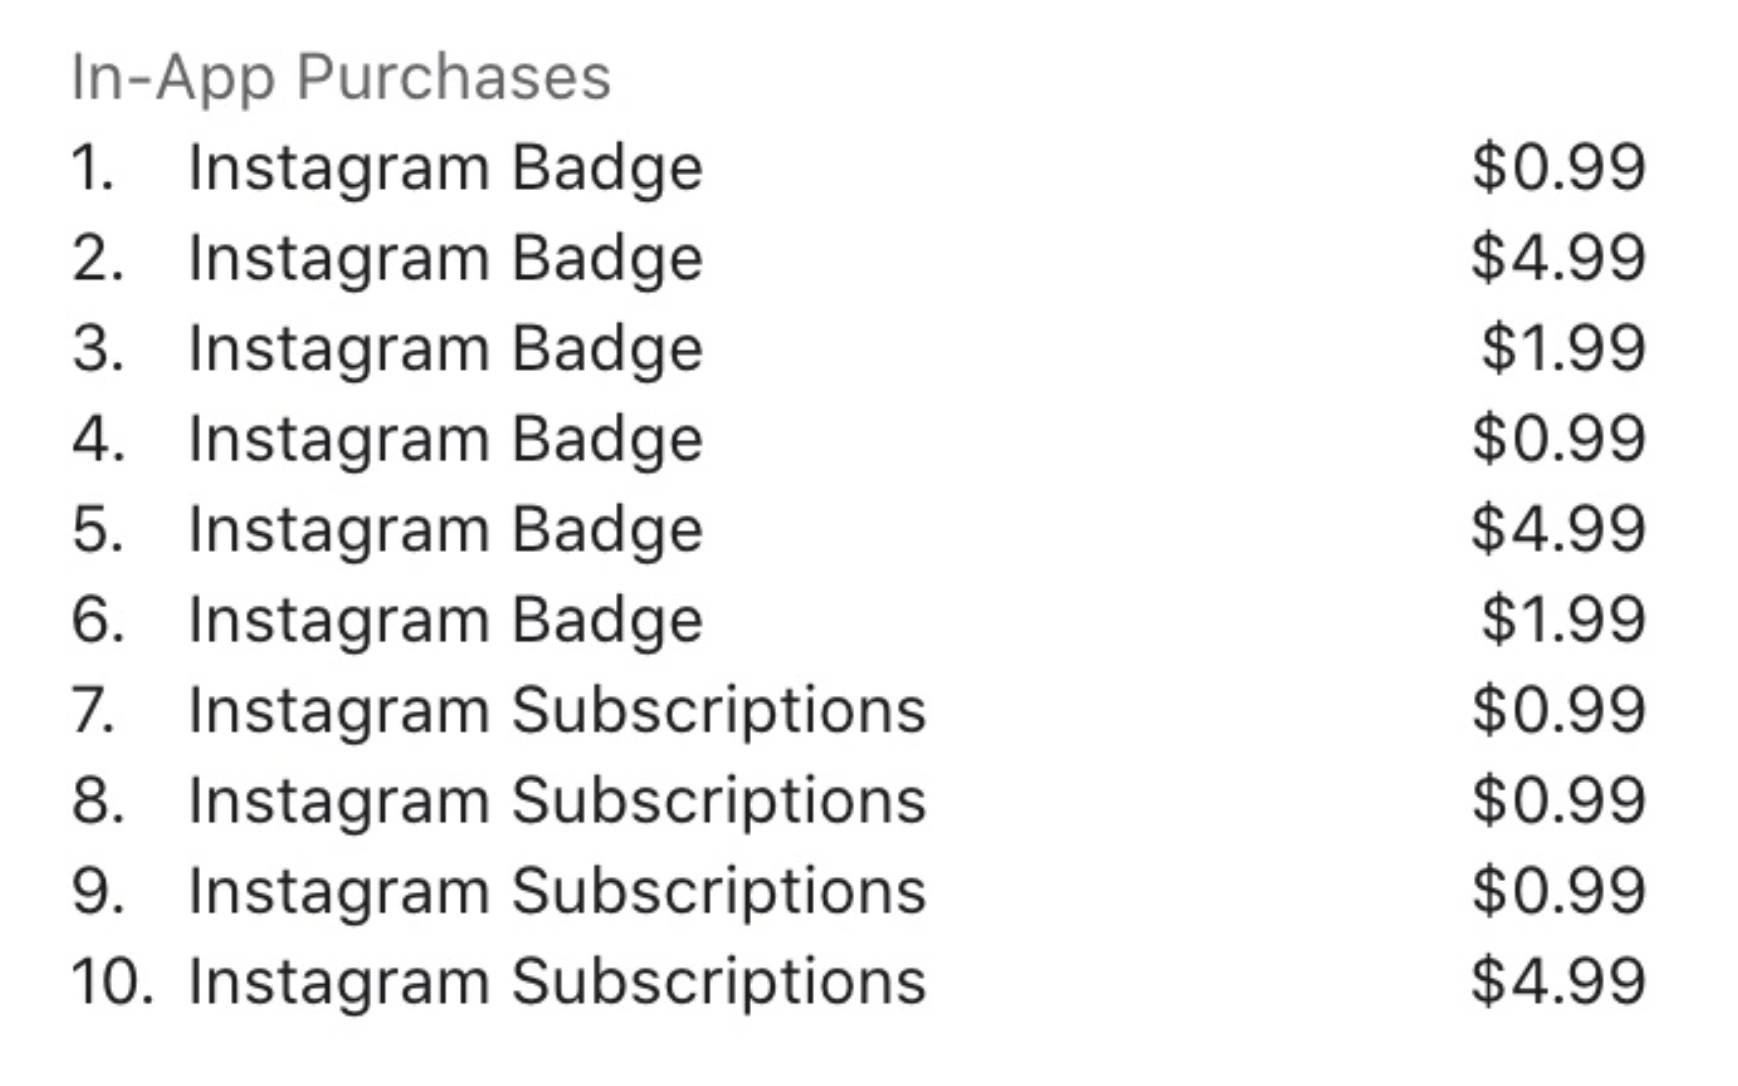 Instagram Subscription Purchase Levels